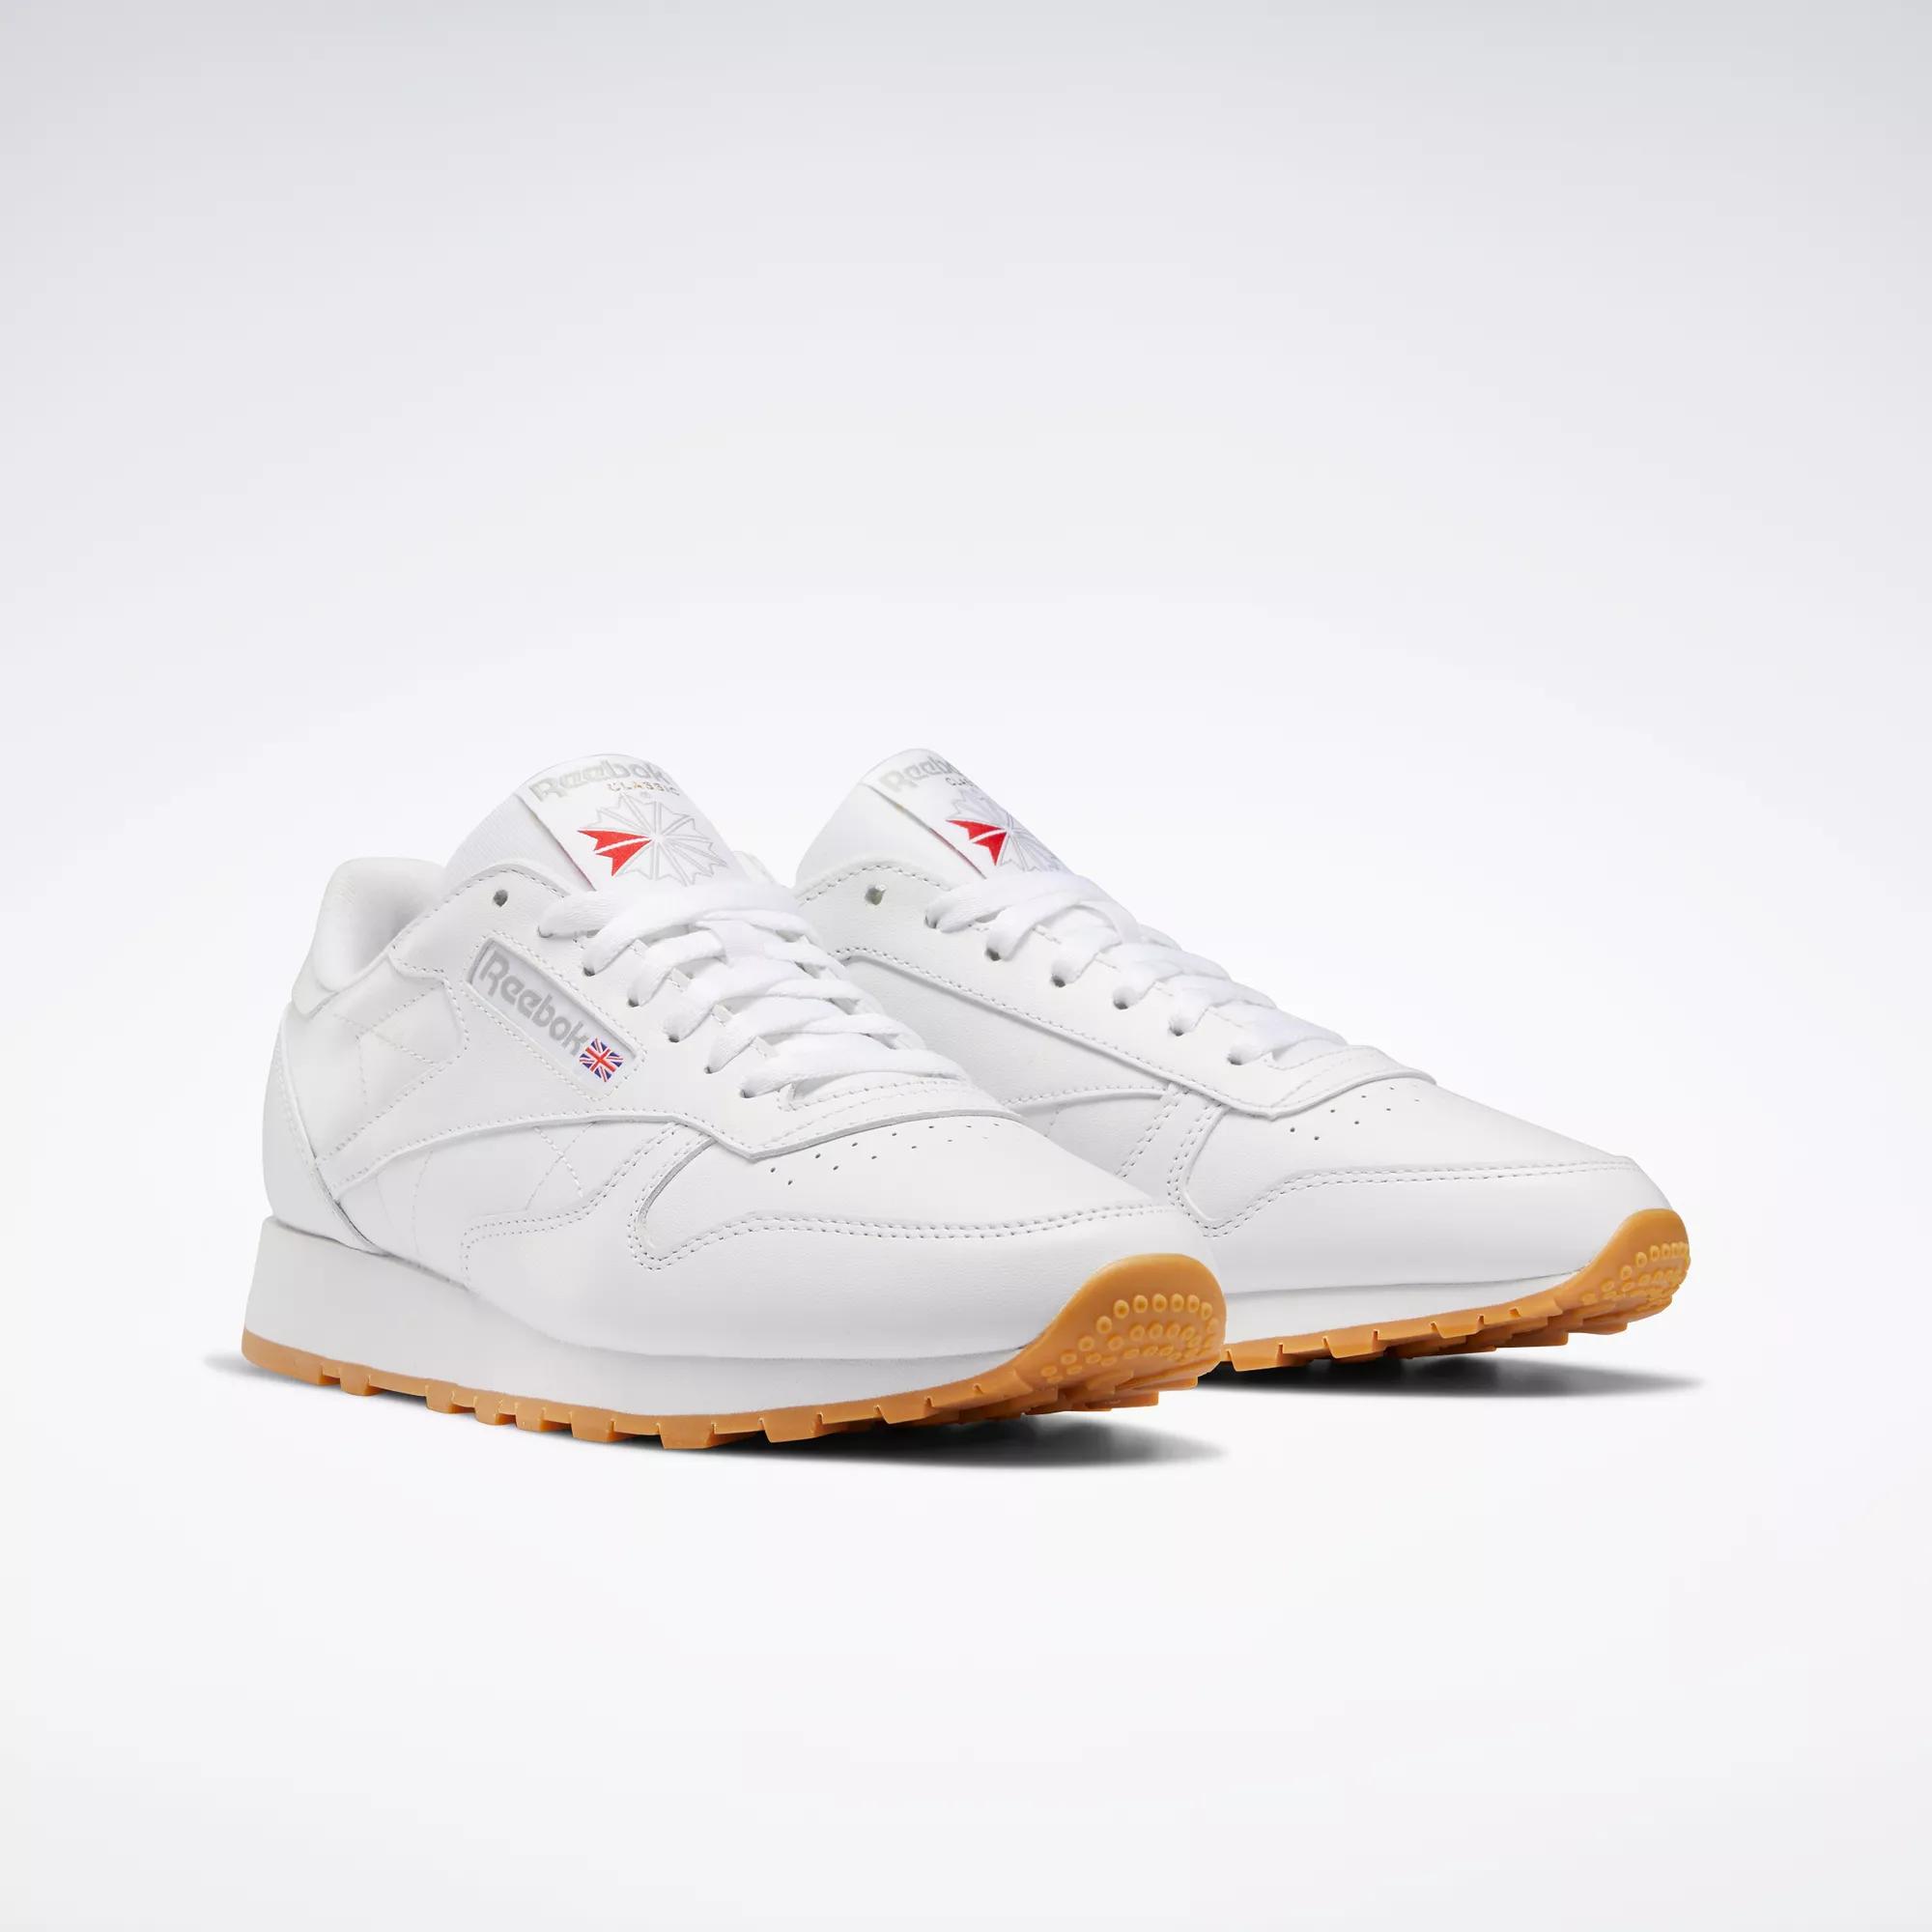 Udfordring Andesbjergene sund fornuft Classic Leather Shoes - Ftwr White / Pure Grey 3 / Reebok Rubber Gum-03 |  Reebok